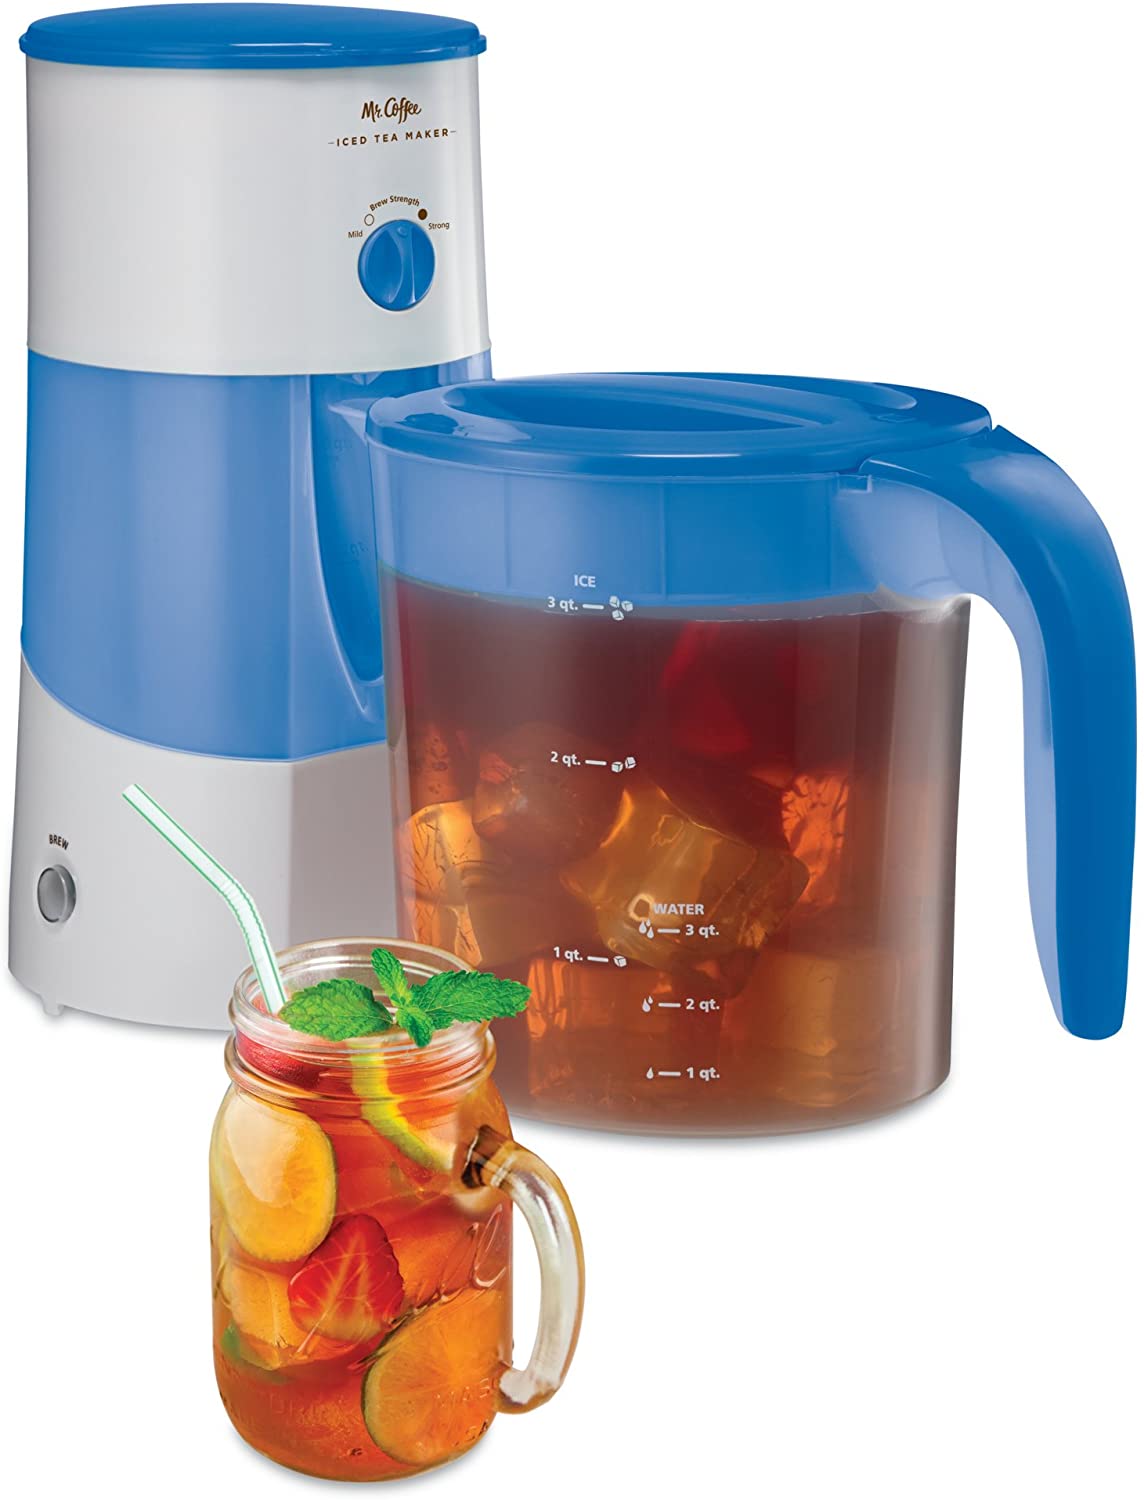 10 BEST ICED TEA MAKERS SEE OUR TOP PICKS FOR 2021